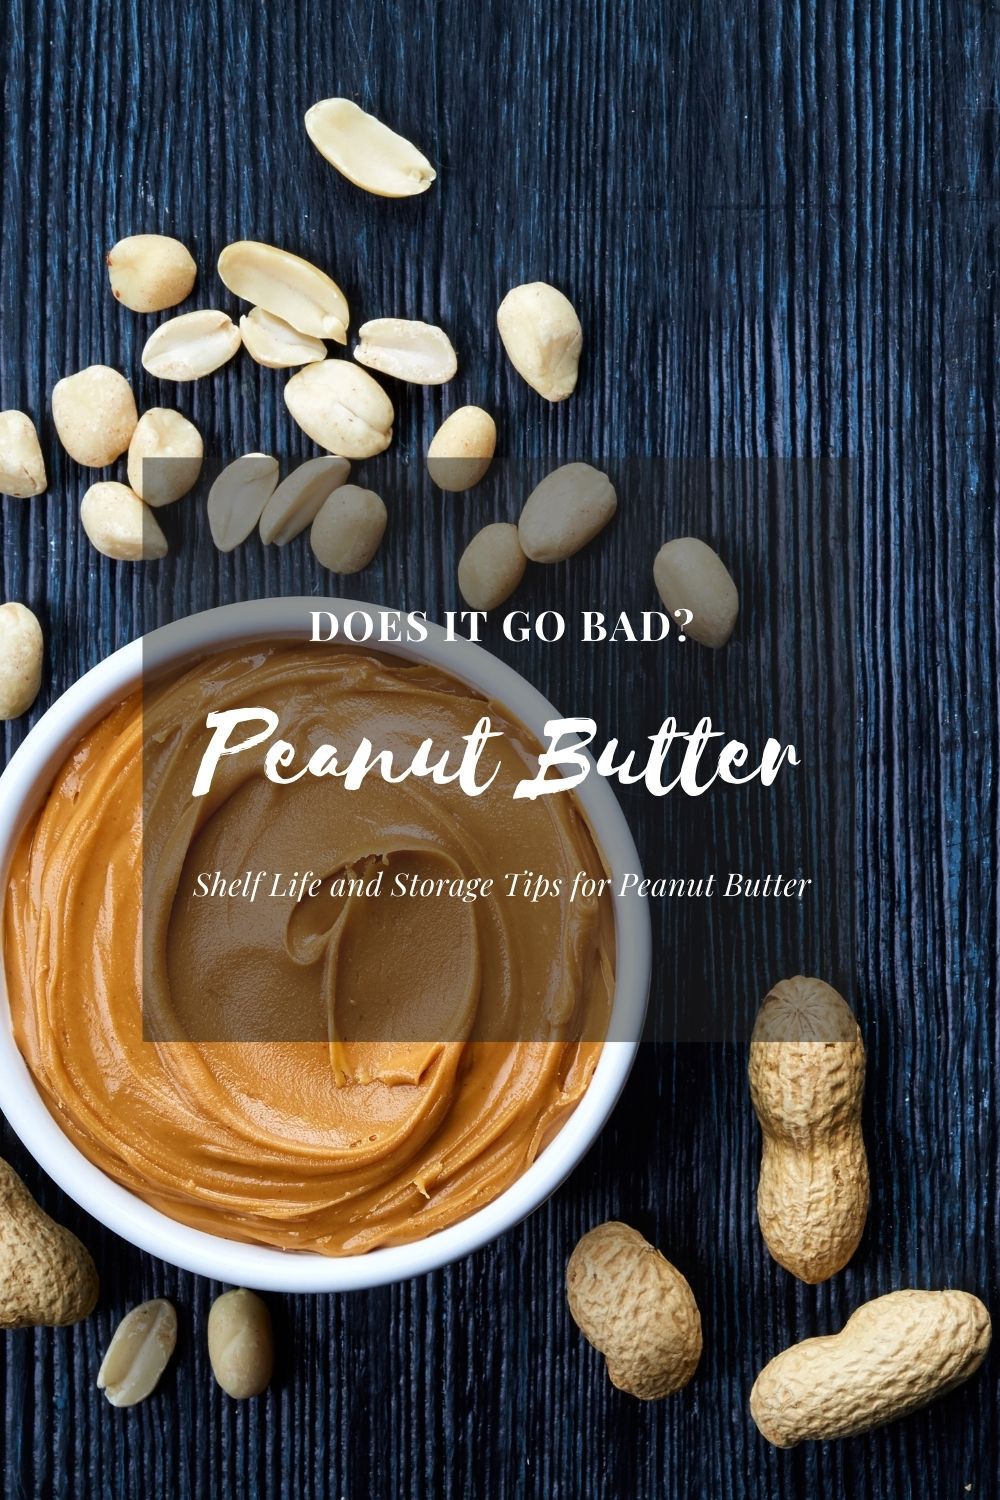 Does Peanut Butter Go Bad? Peanut Butter Shelf Life and Storage Tips